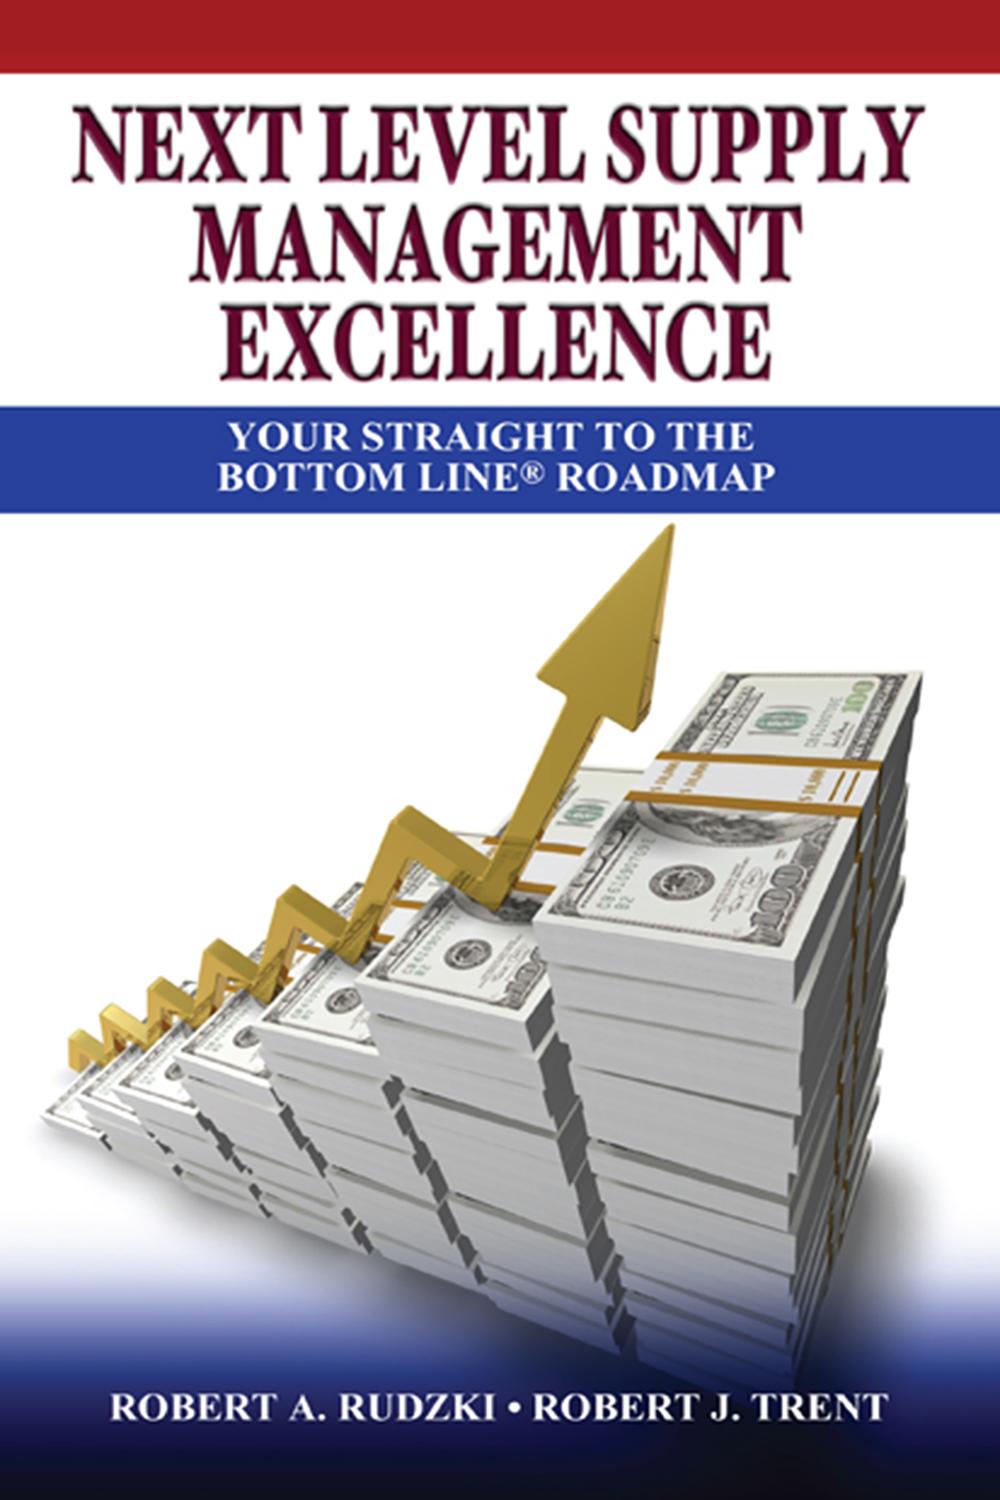 next level supply management excellence your straight to the bottom line roadmap 1st edition robert trent ,